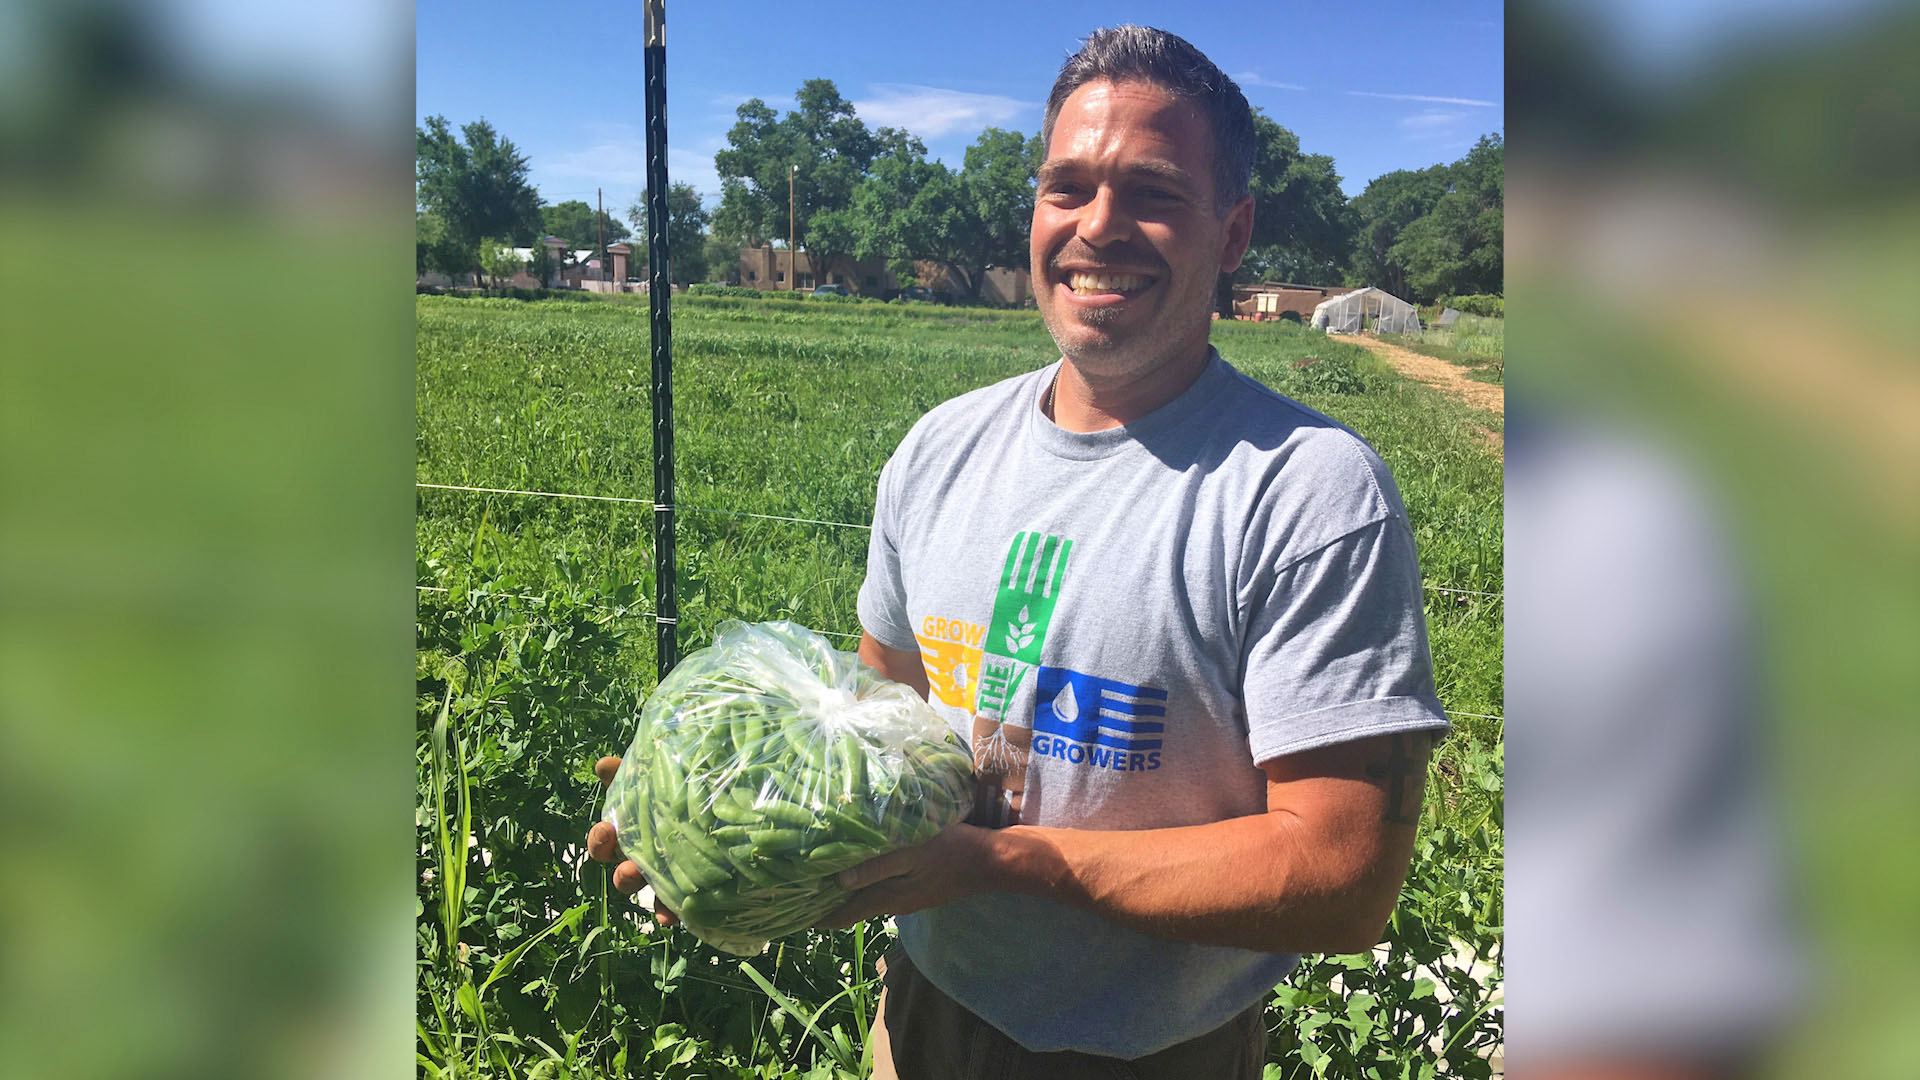 Smiling man standing in a farm holding a bag of produce